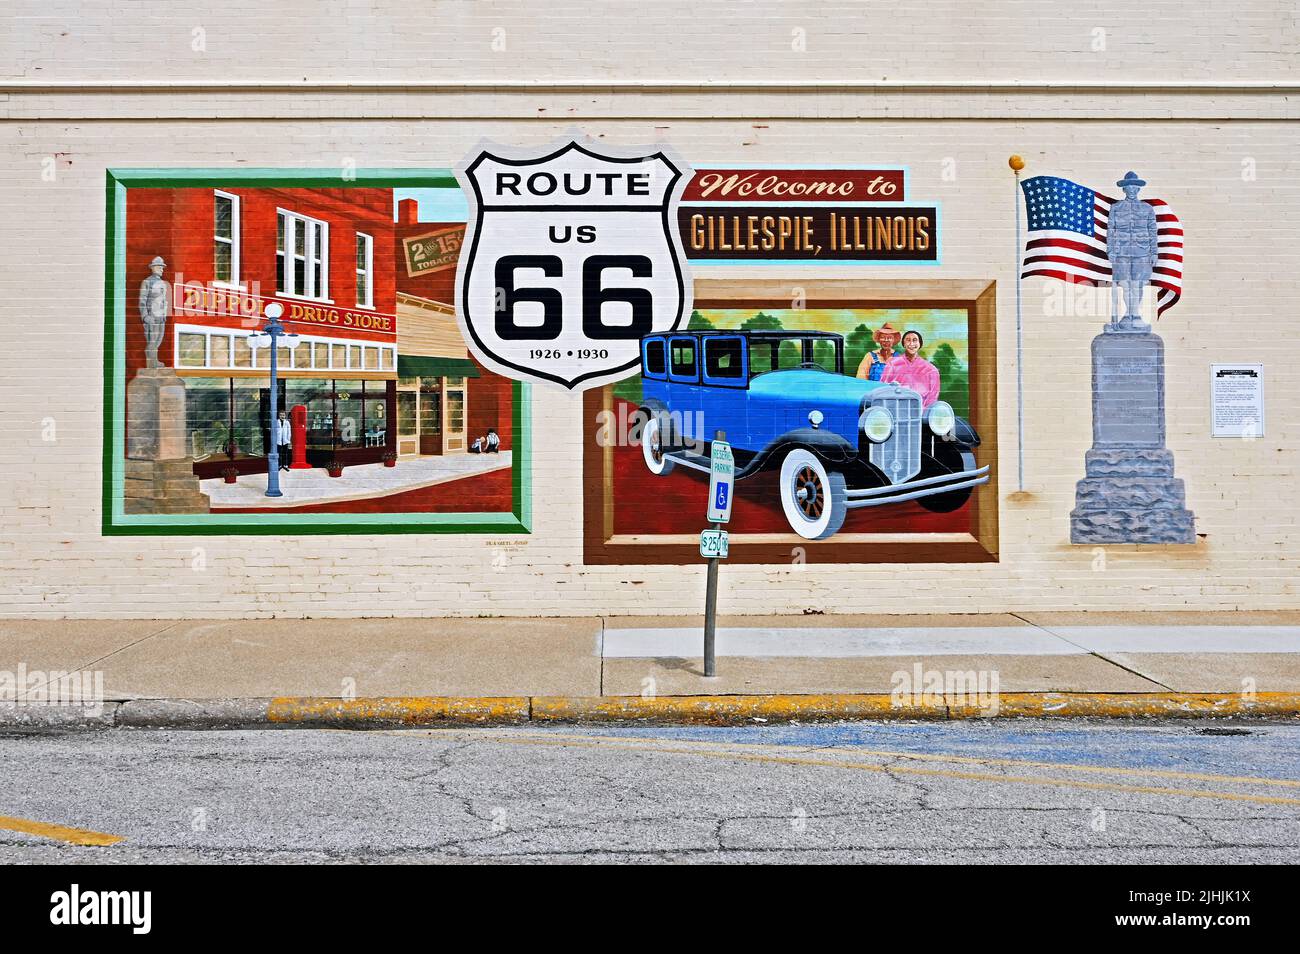 Route 66 Mural in Gillespie, Illinois, United States of America Stock Photo